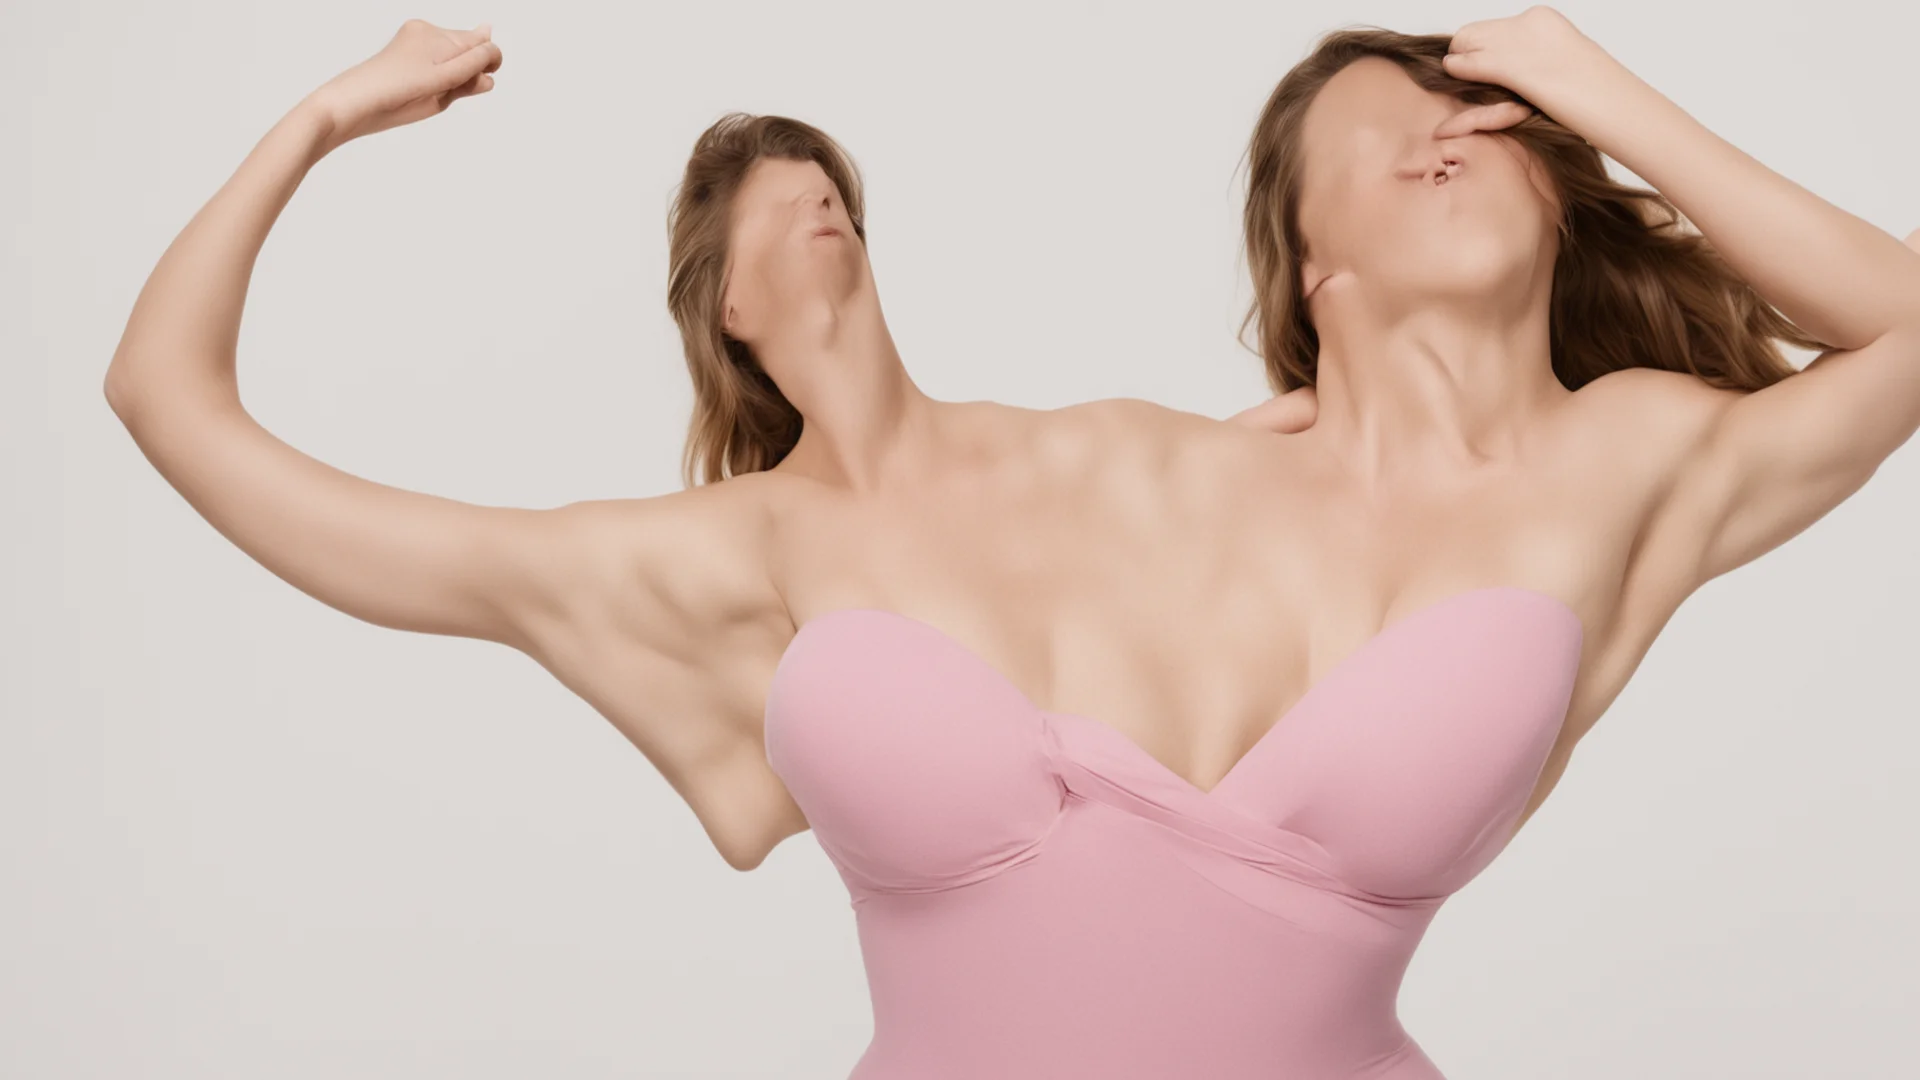 aia woman wearing strapless dress having her armpits tickled wide